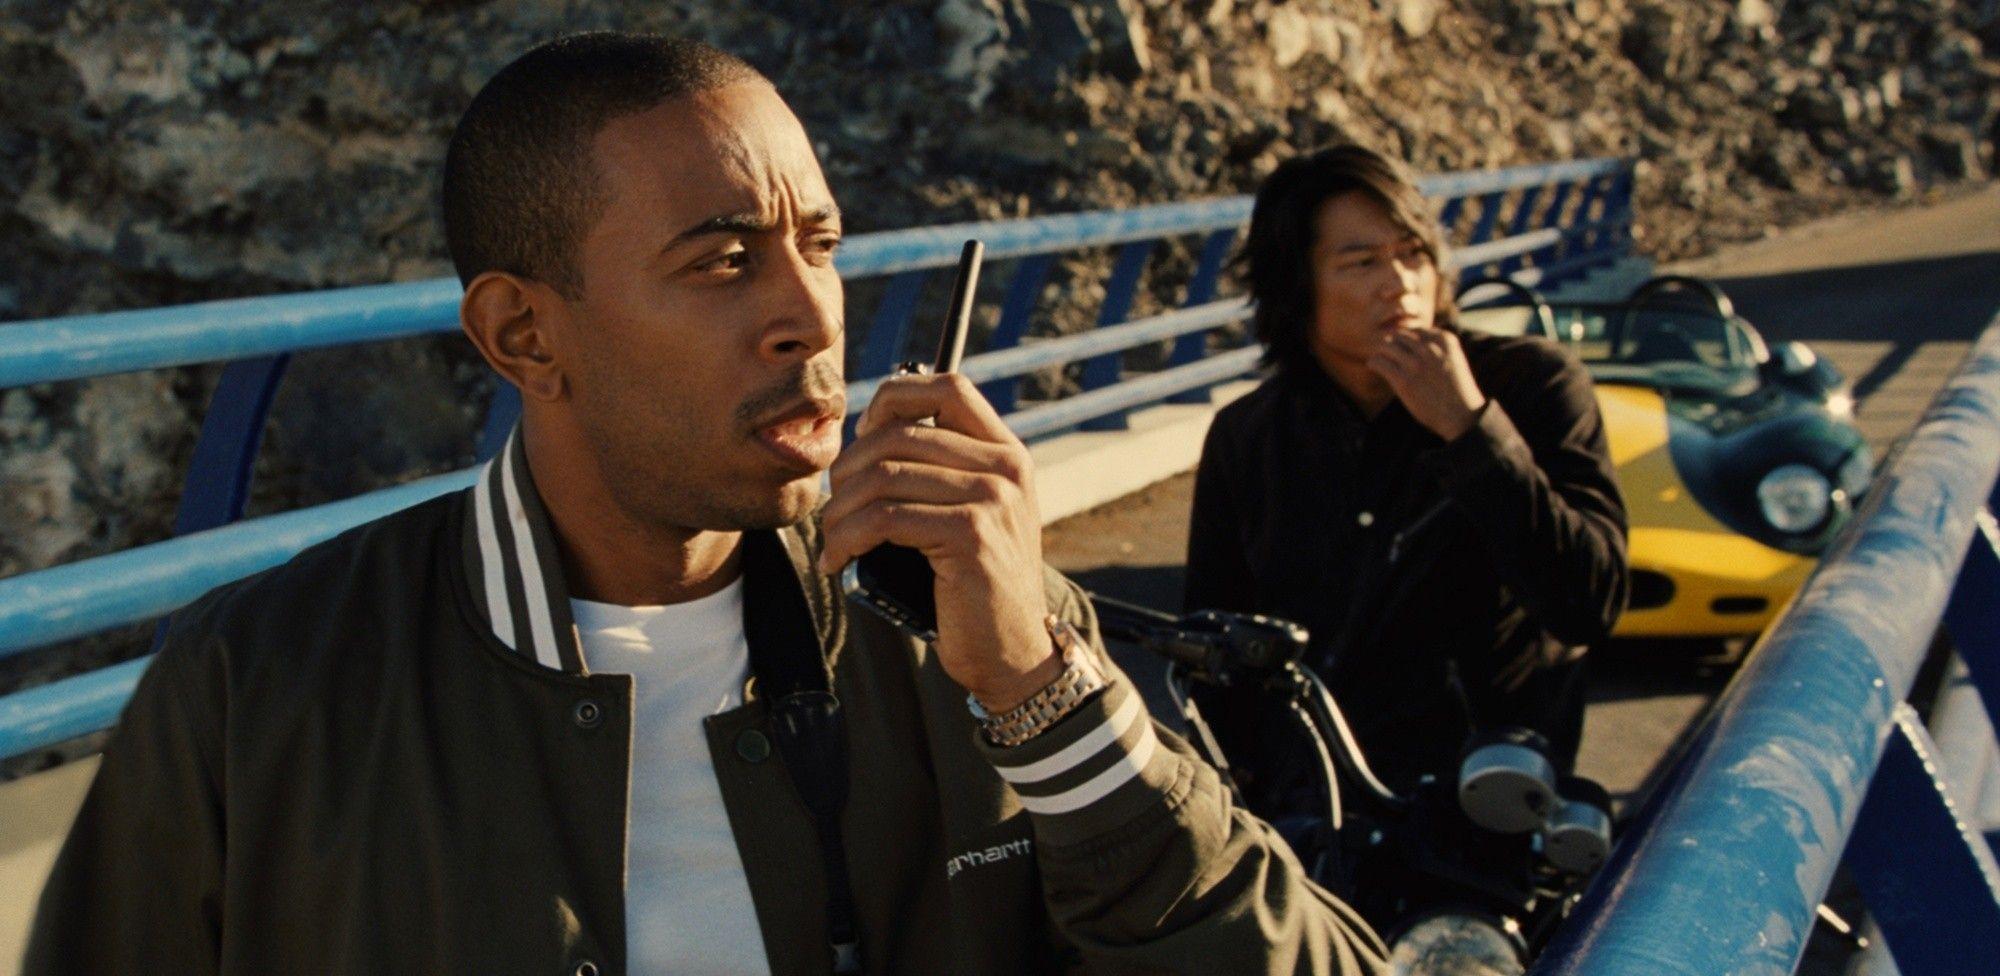 Ludacris and Sung Kang in furious 6 [2013]. fast and furious